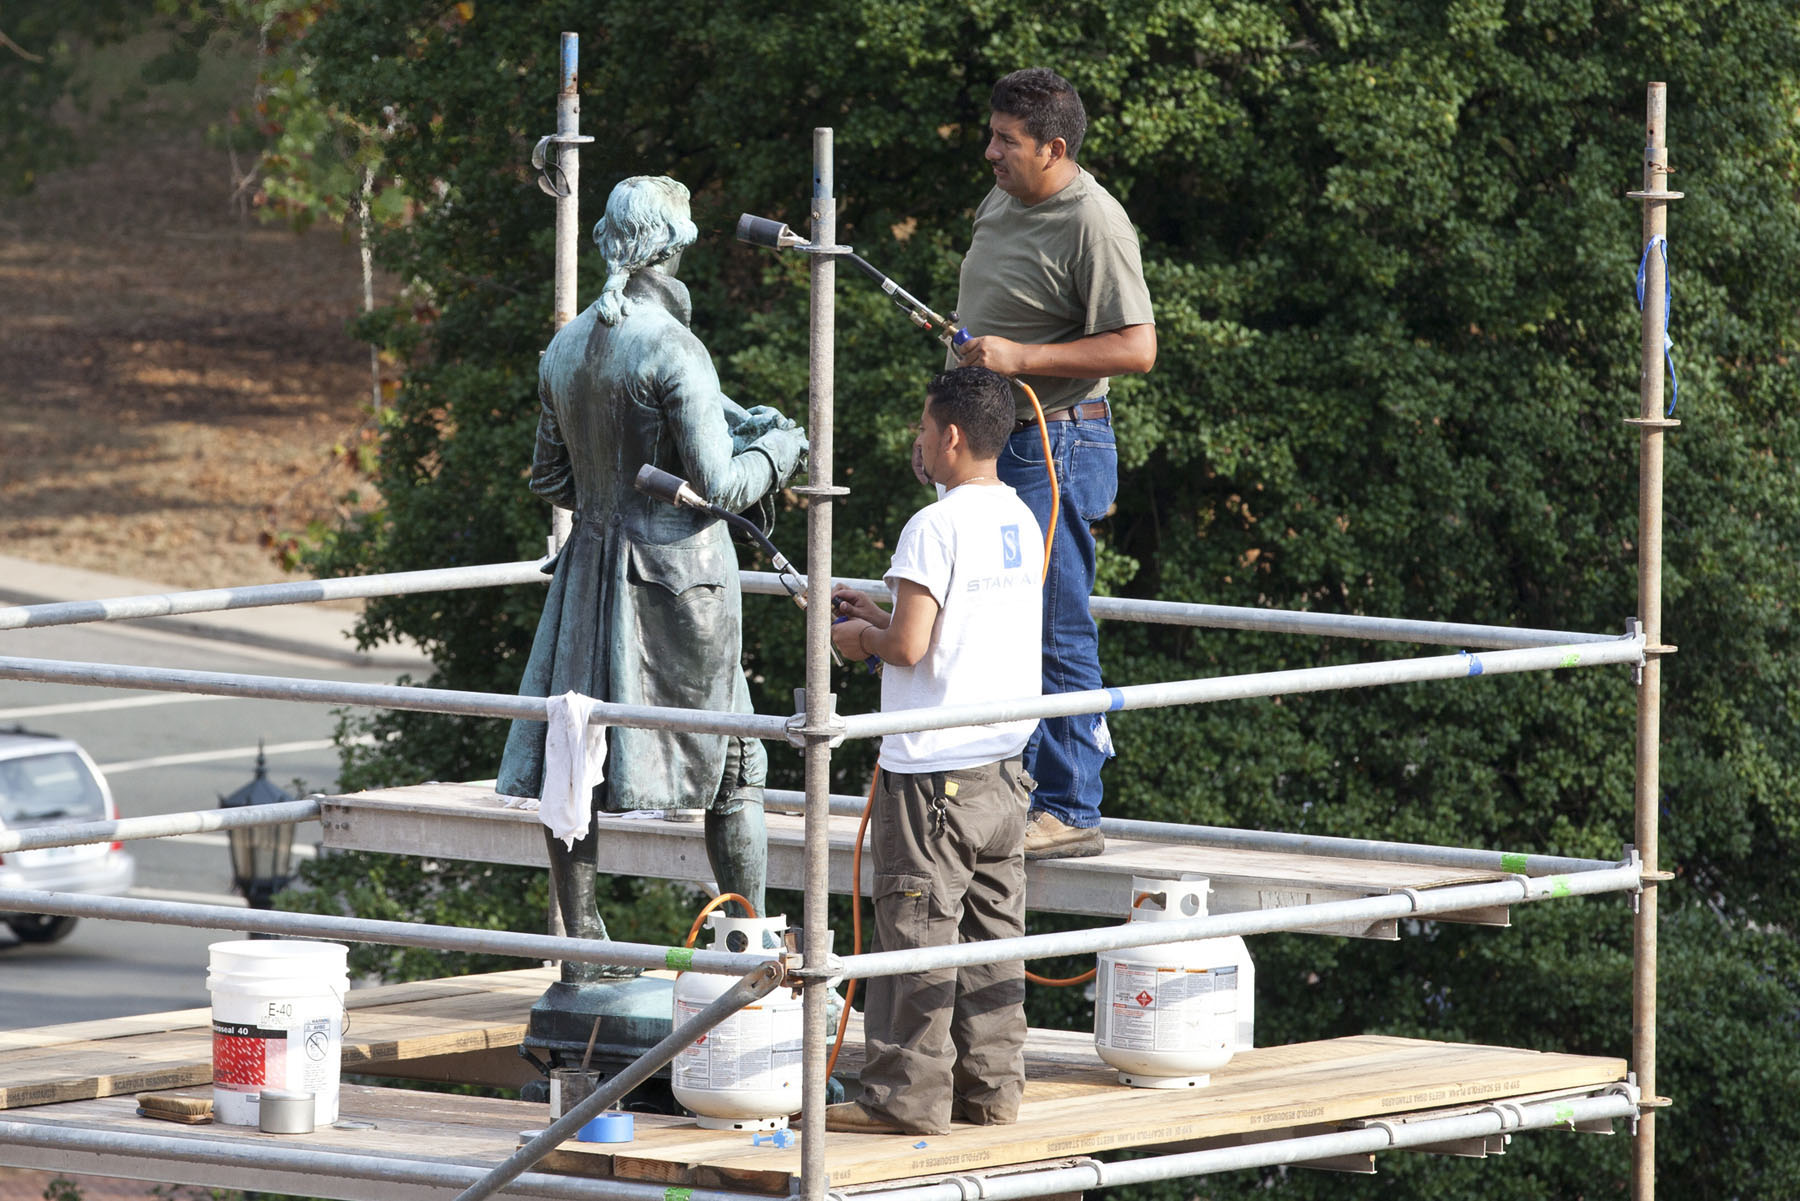 Craftsmen Rene Terrazas and Jacob Cruz, apply a layer of hot wax to a statue of Thomas Jefferso